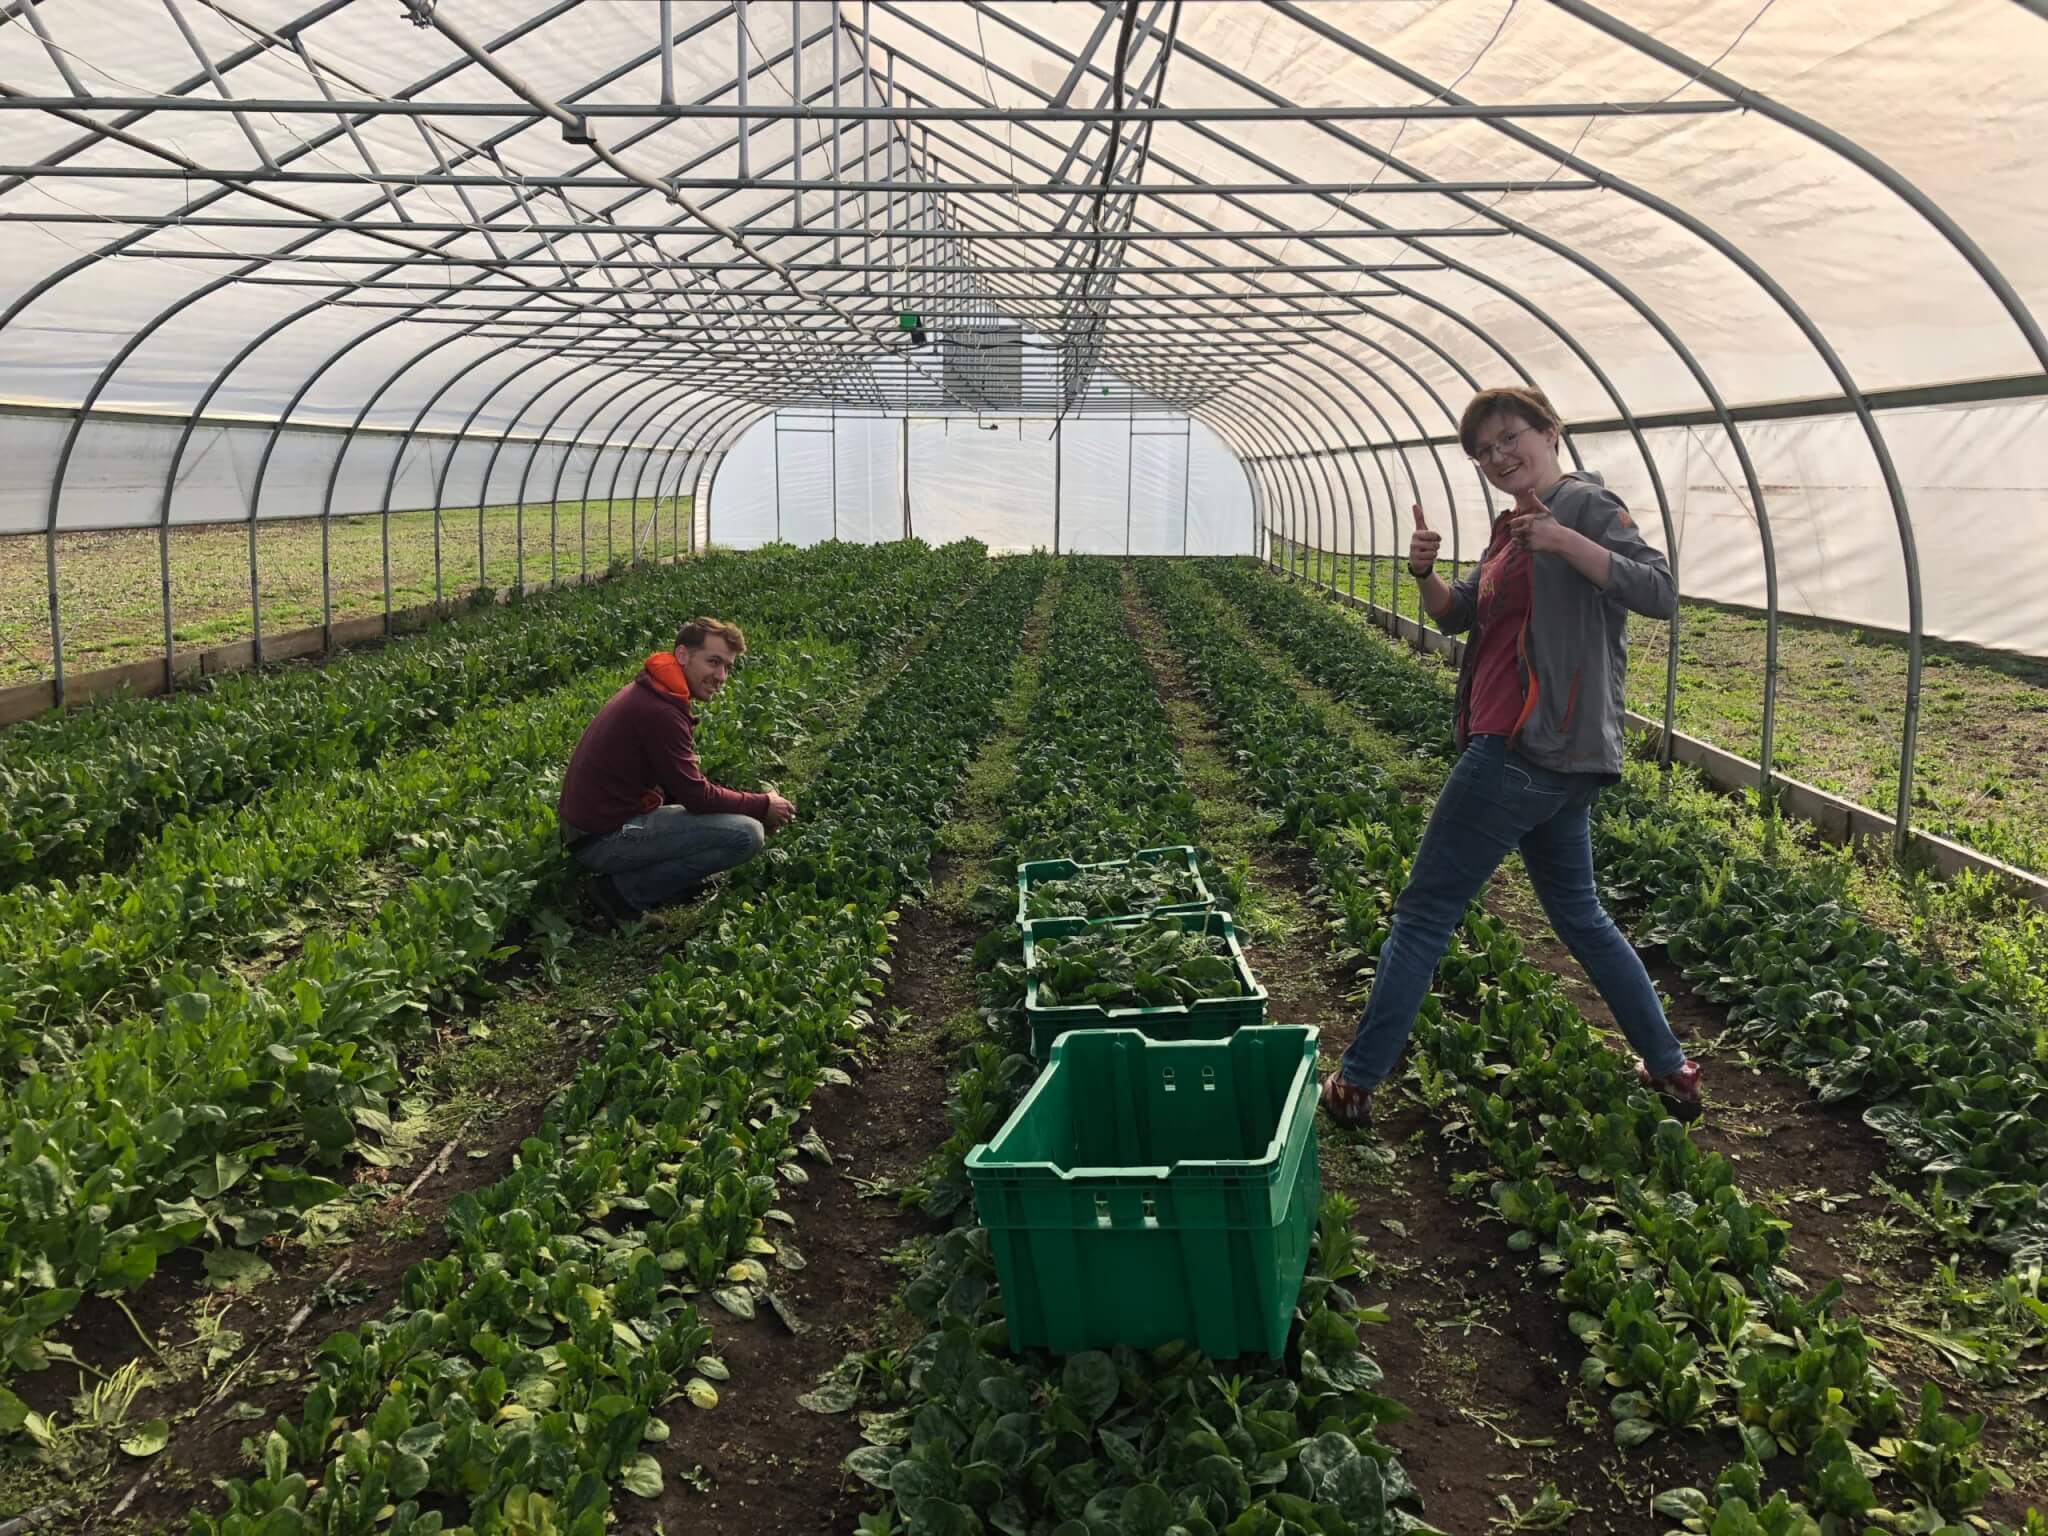 Students working at the Purdue Student Farm to harvest and deliver leafy greens to local food banks.